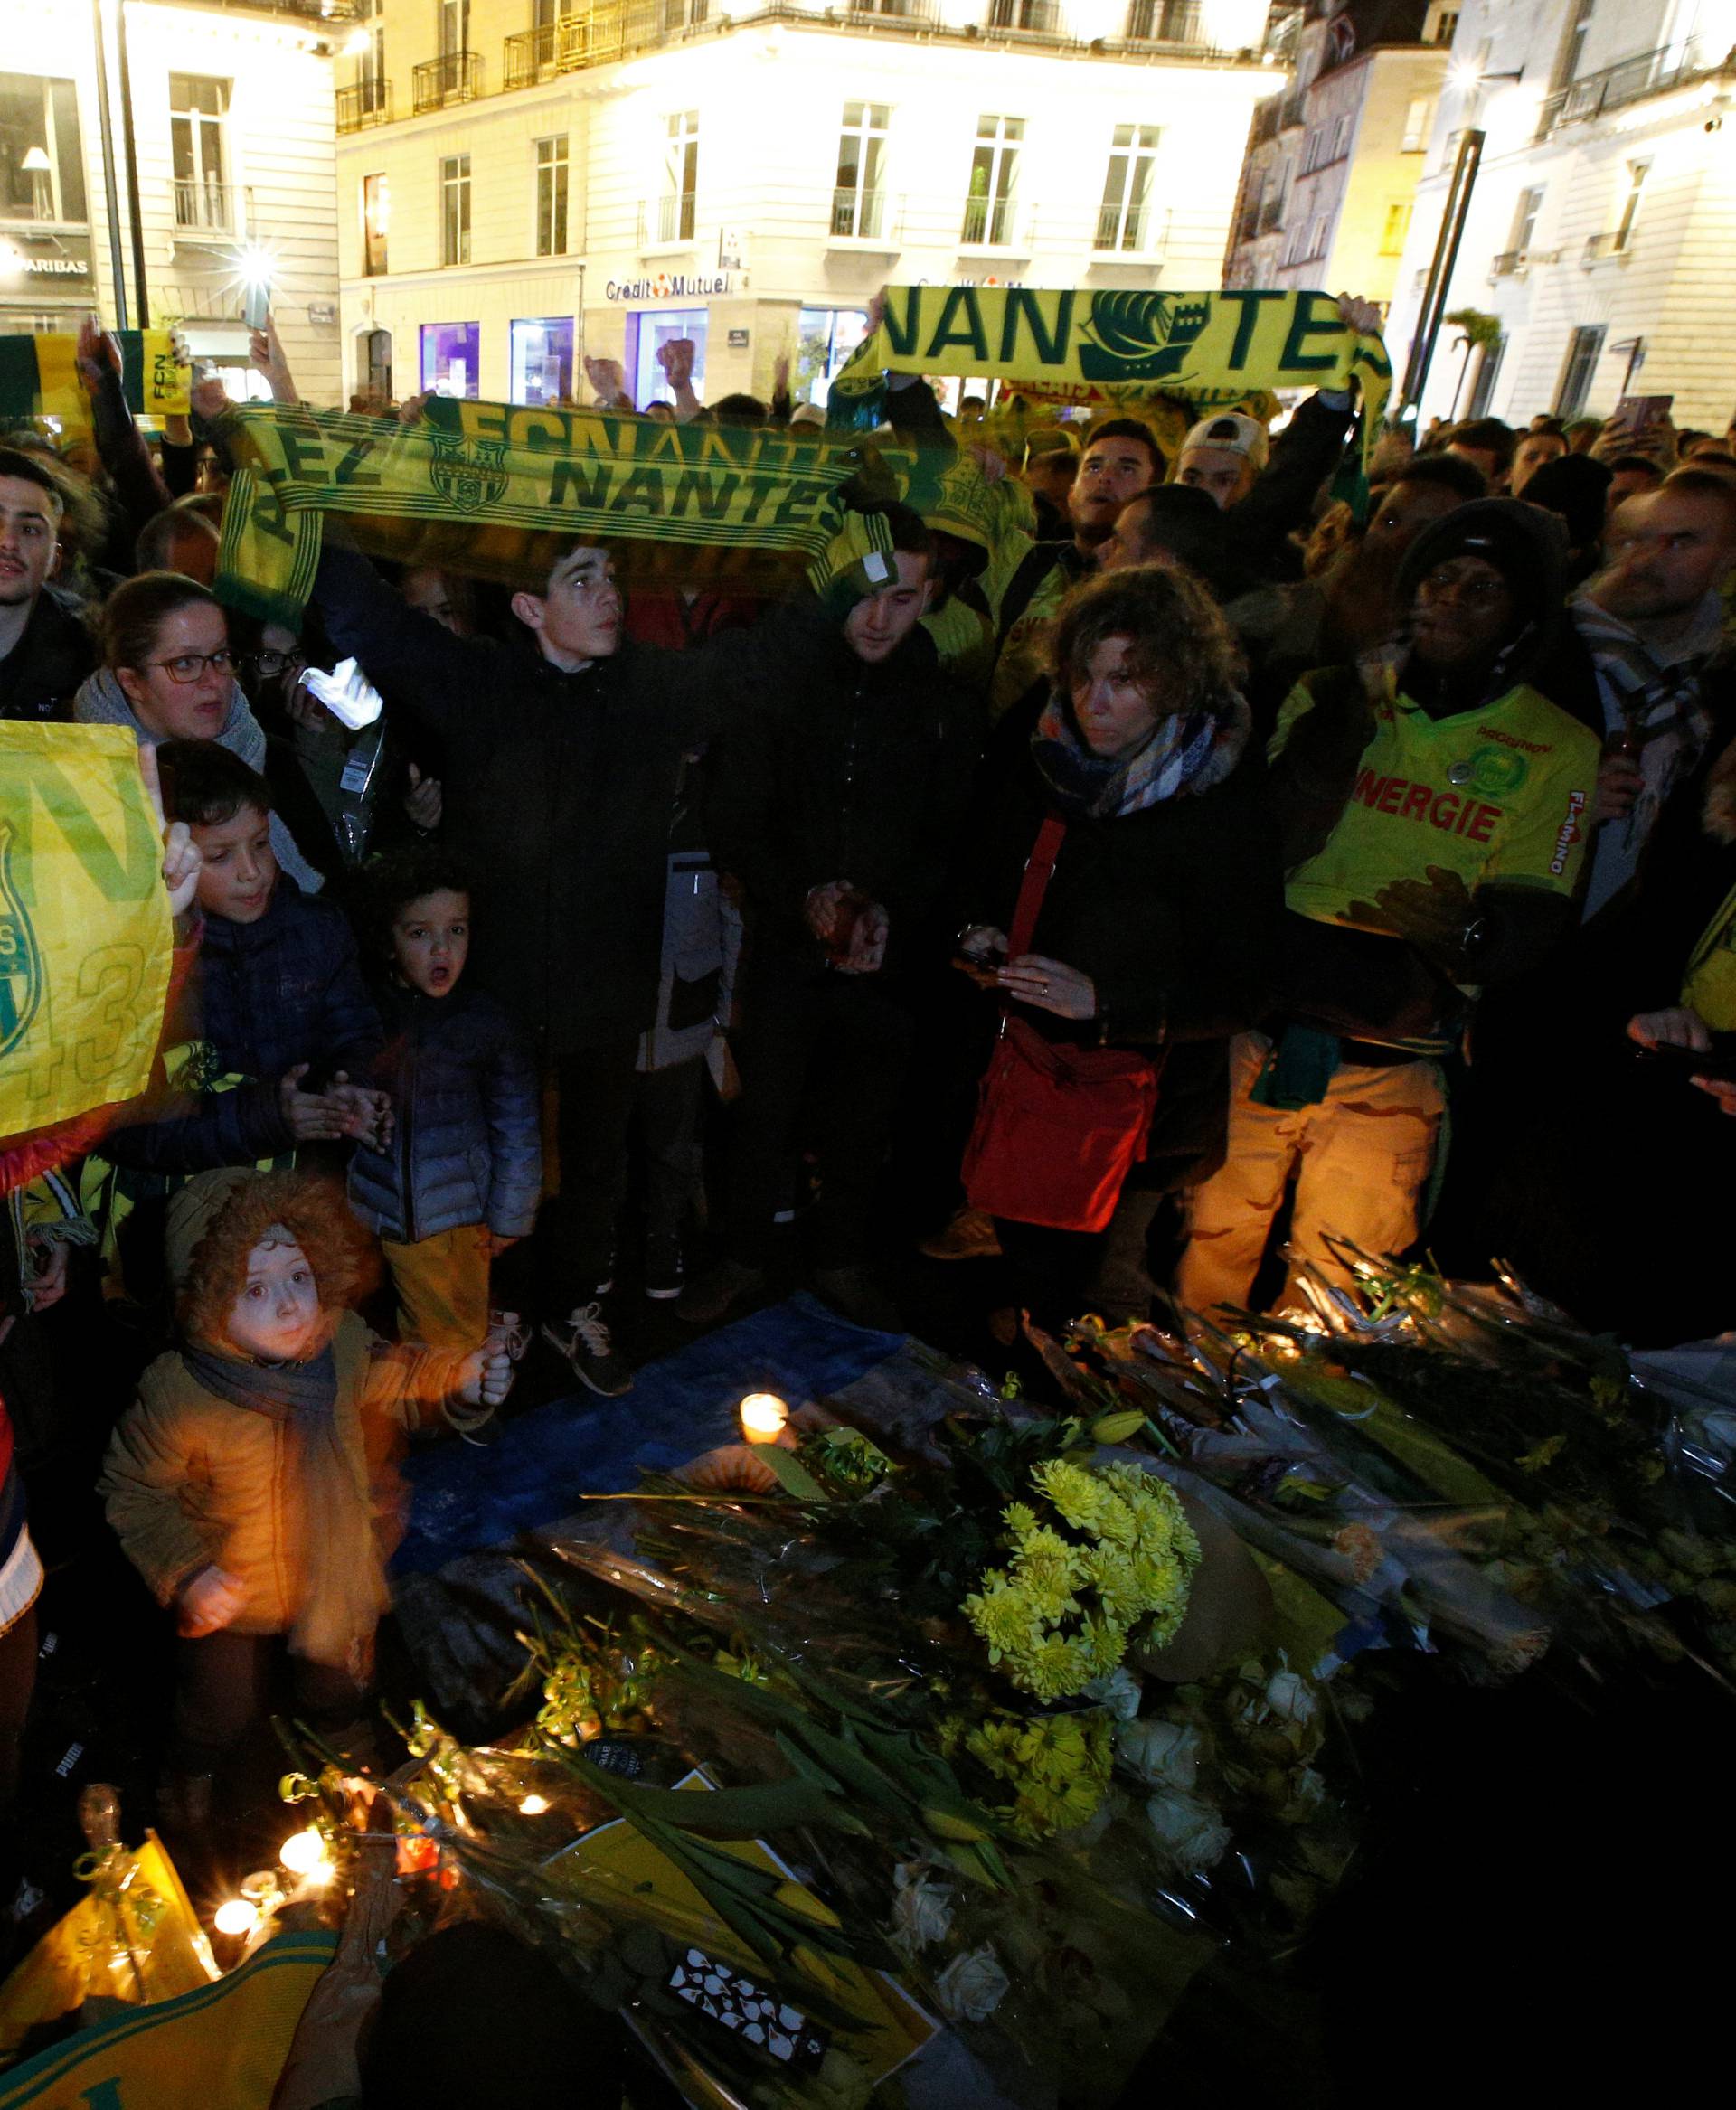 Fans gather near a row of yellow tulips in Nantes' city center after news that newly-signed Cardiff City soccer player Emiliano Sala was missing after the light aircraft he was travelling in disappeared between France and England